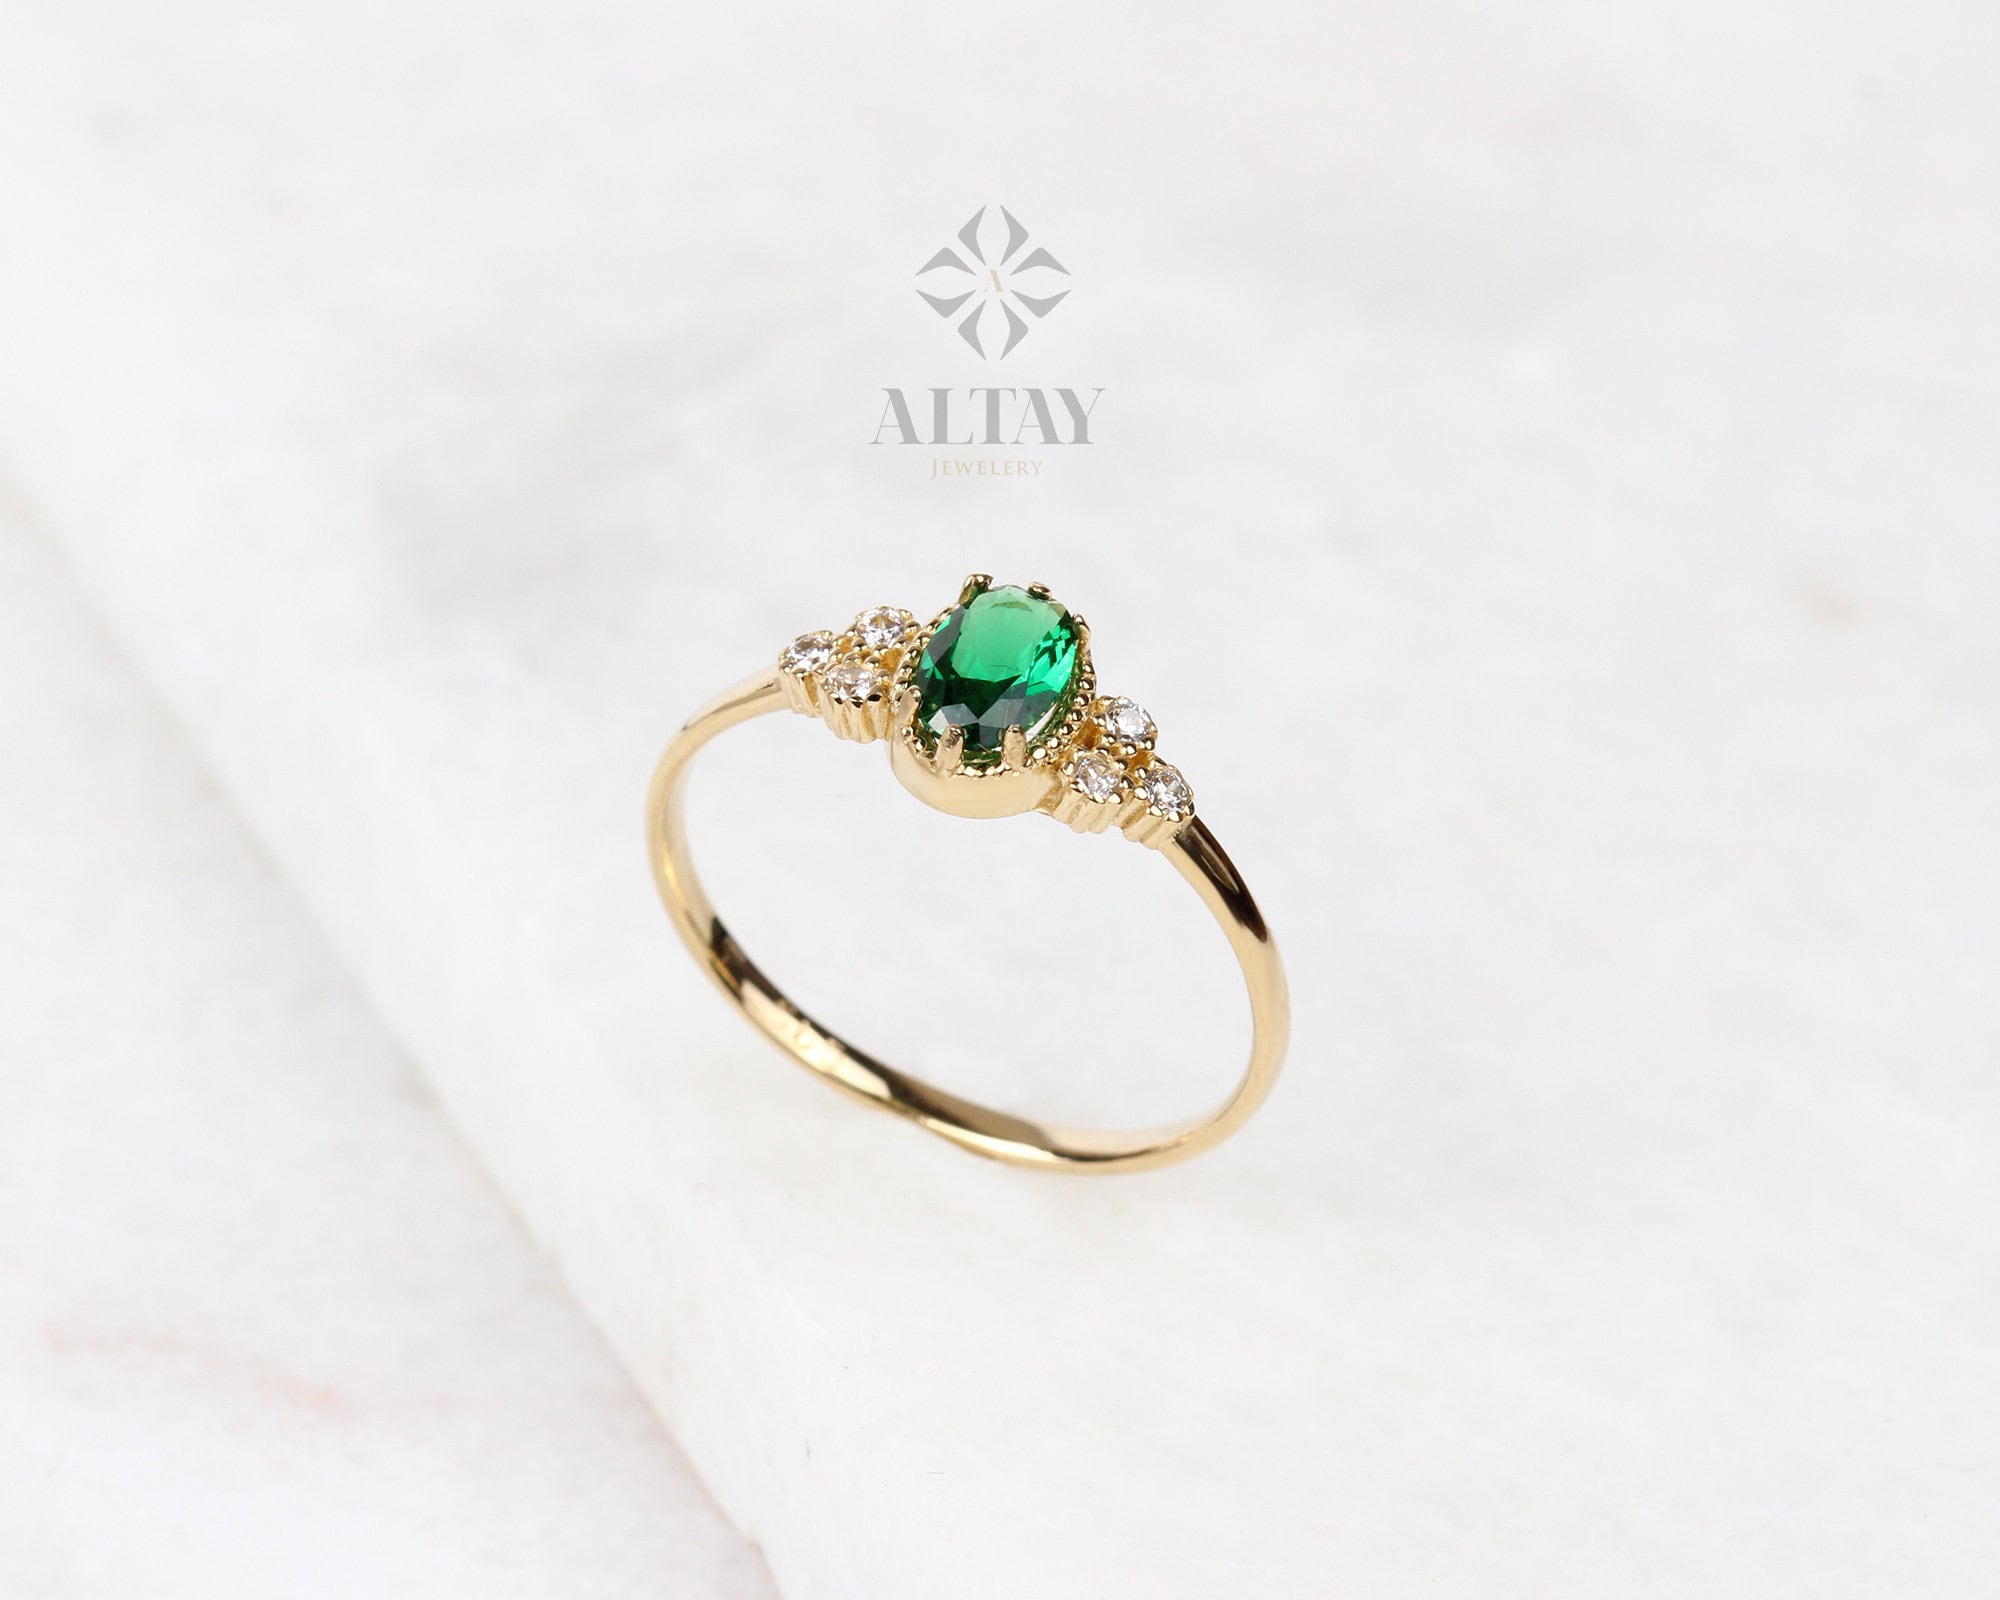 14K Gold Emerald Ring, Emerald Engagement Diamond Ring, Oval Cut Emerald Diamond Ring, Promise Ring, May Birthstone Solitaire Ring, Gift